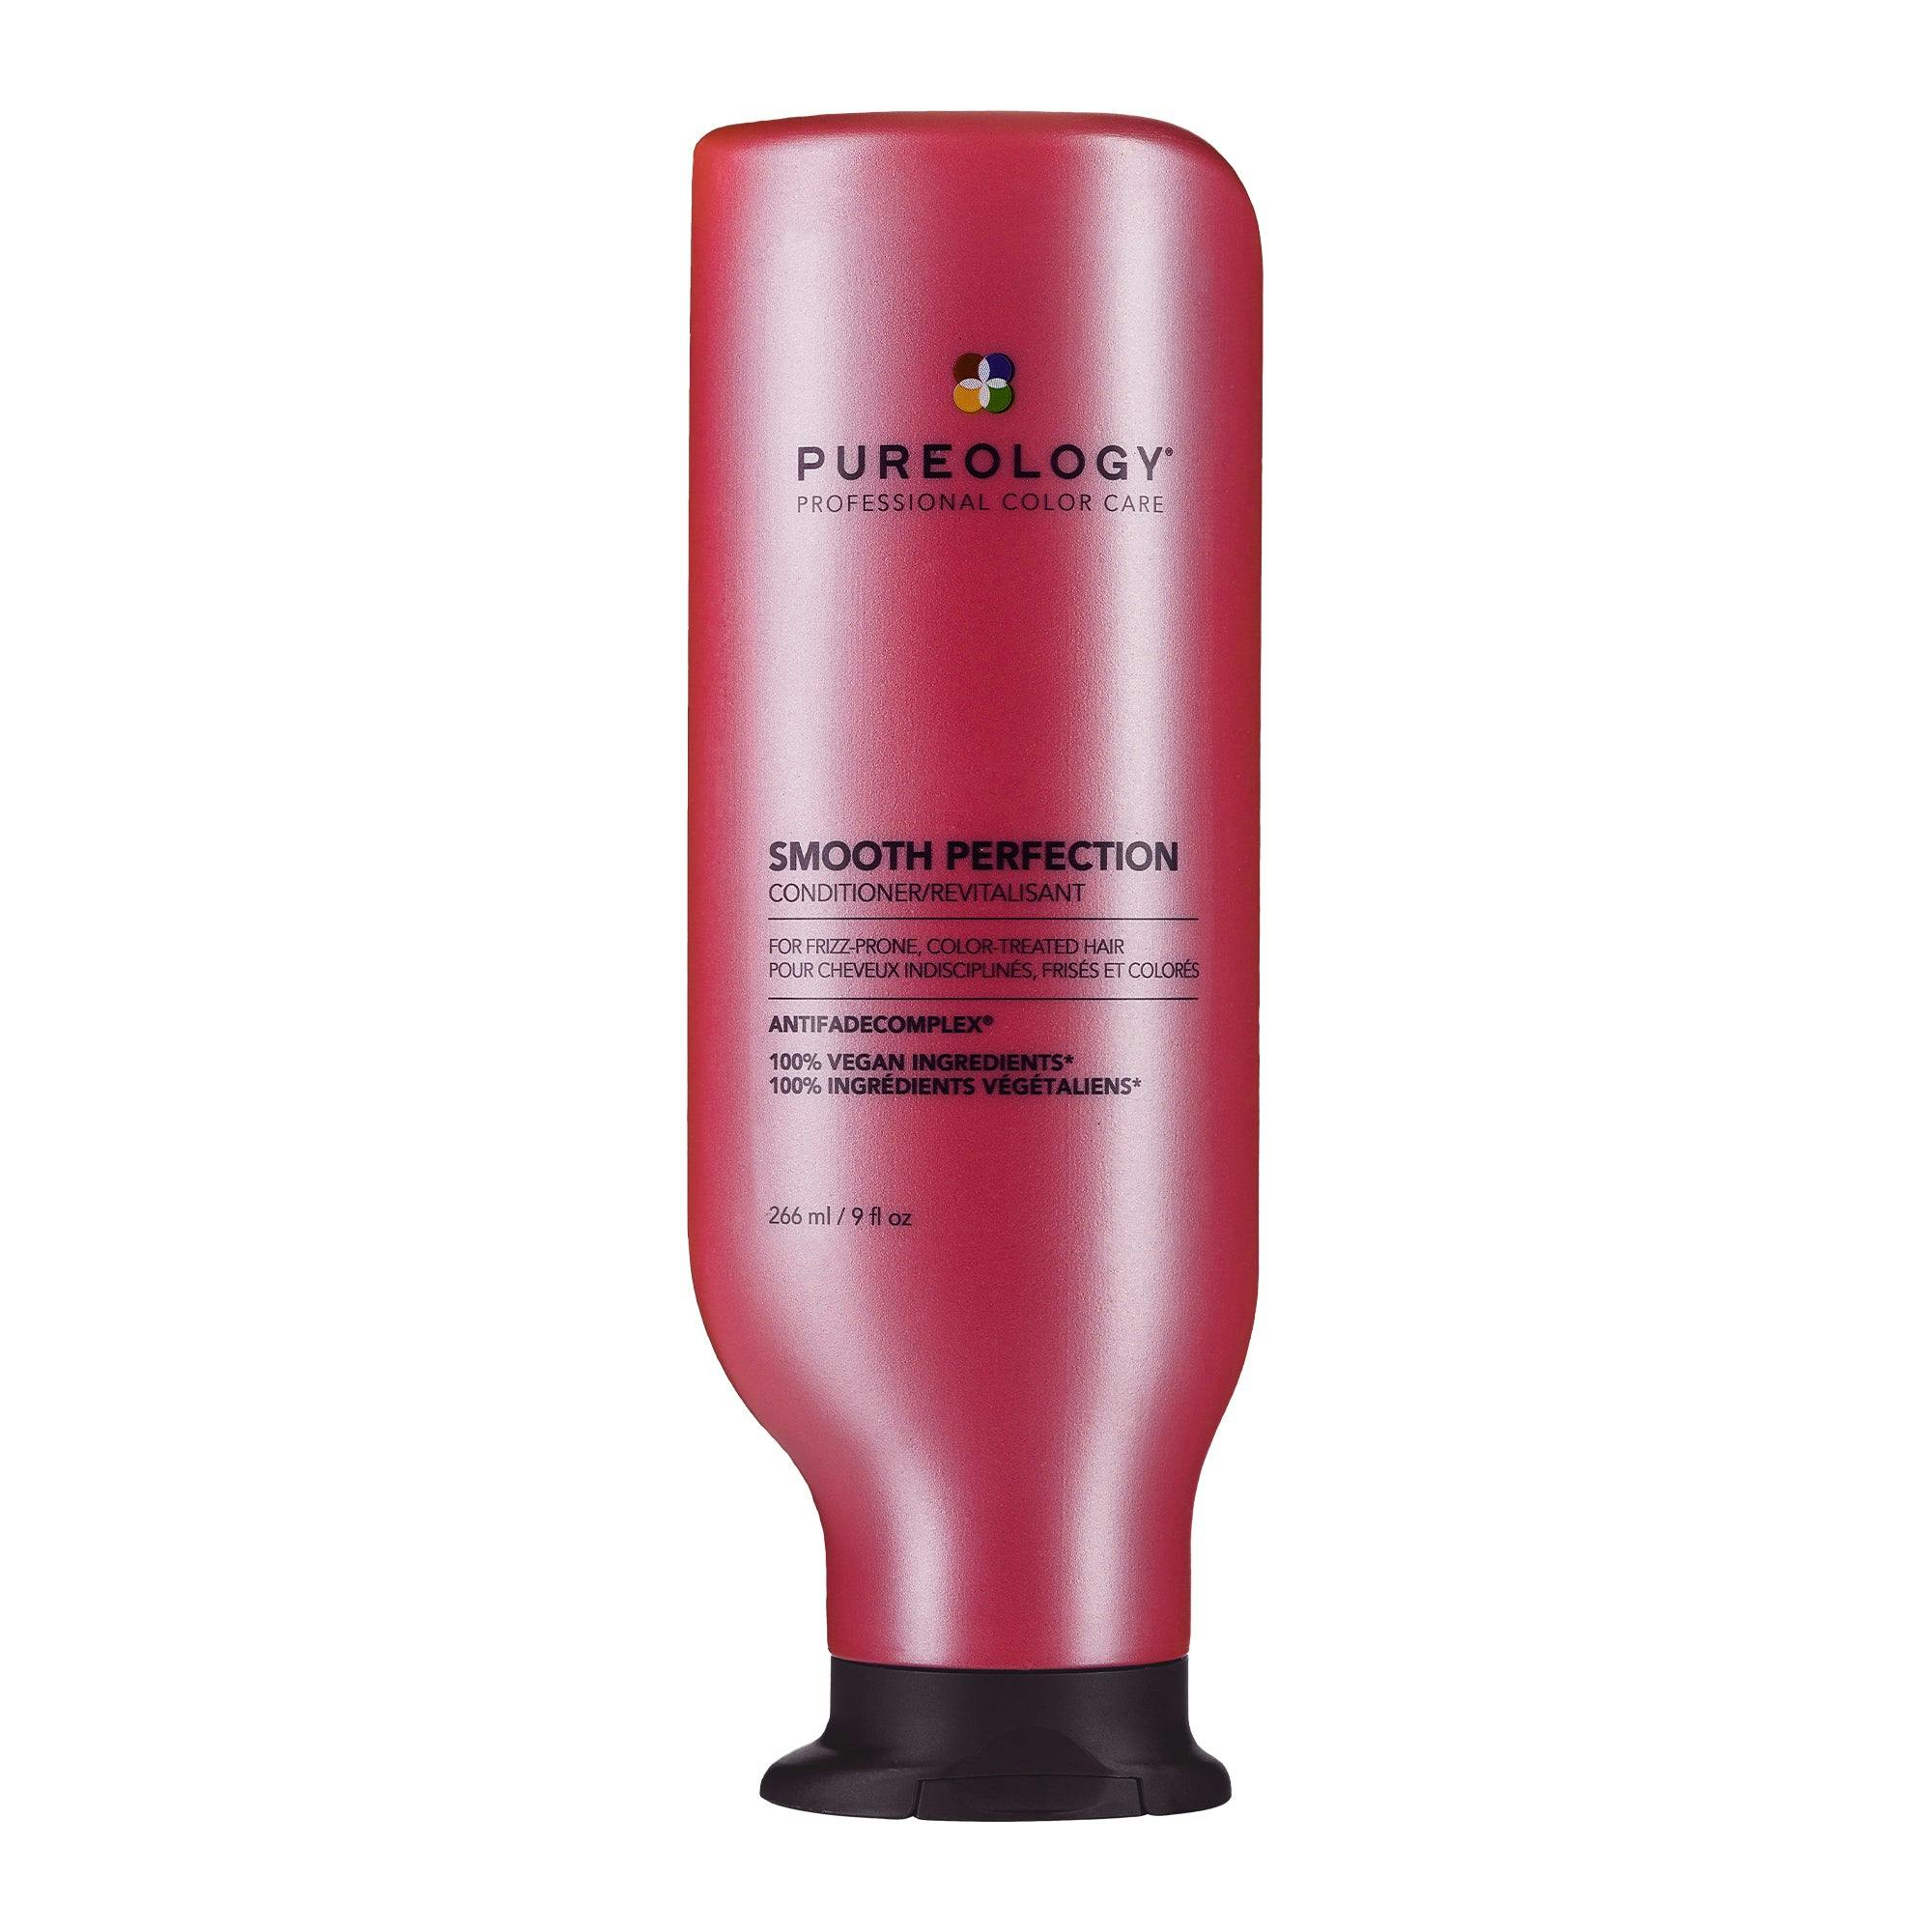 Pureology Smooth Perfection Shampoo and Conditioner Duo Bundle